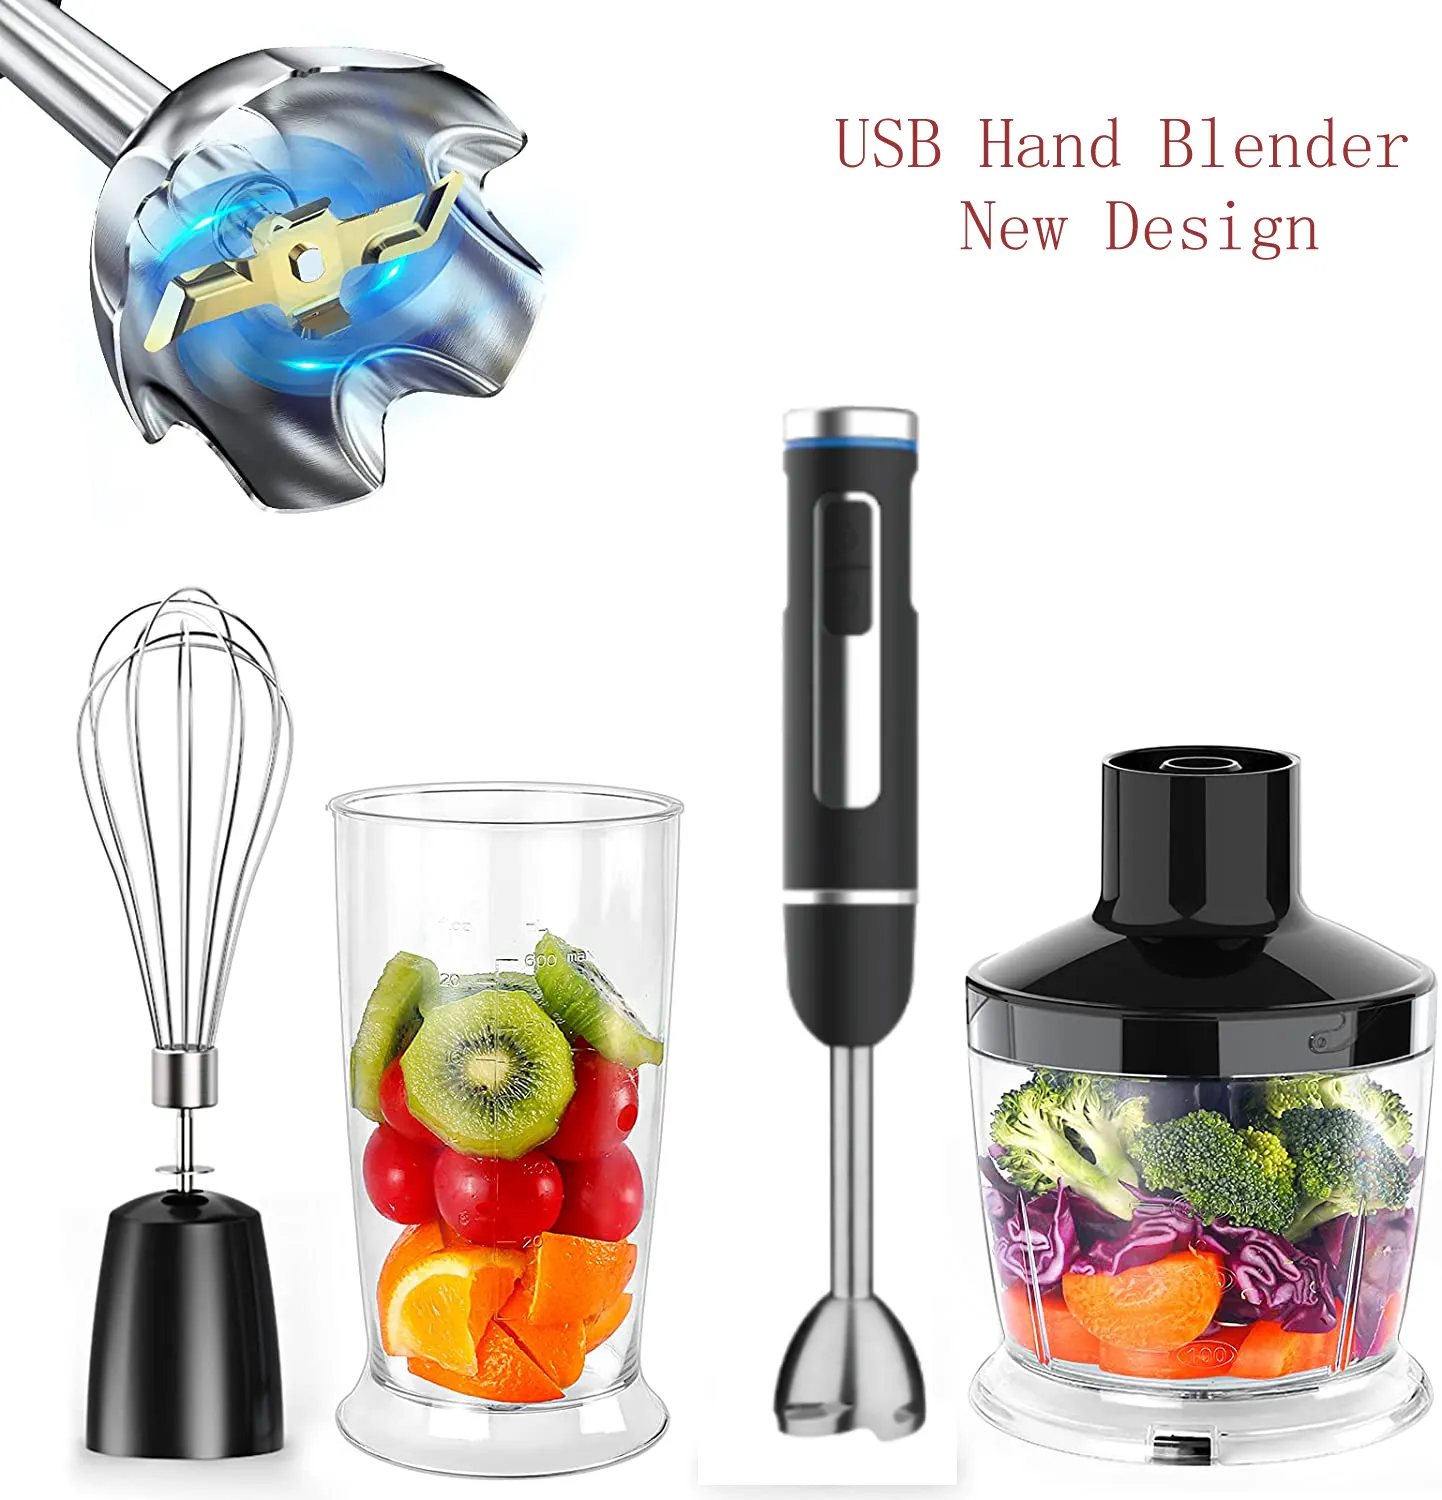 New model USB 150W Immersion Stick Blender Portable Electric Hand Mixer with Chopper